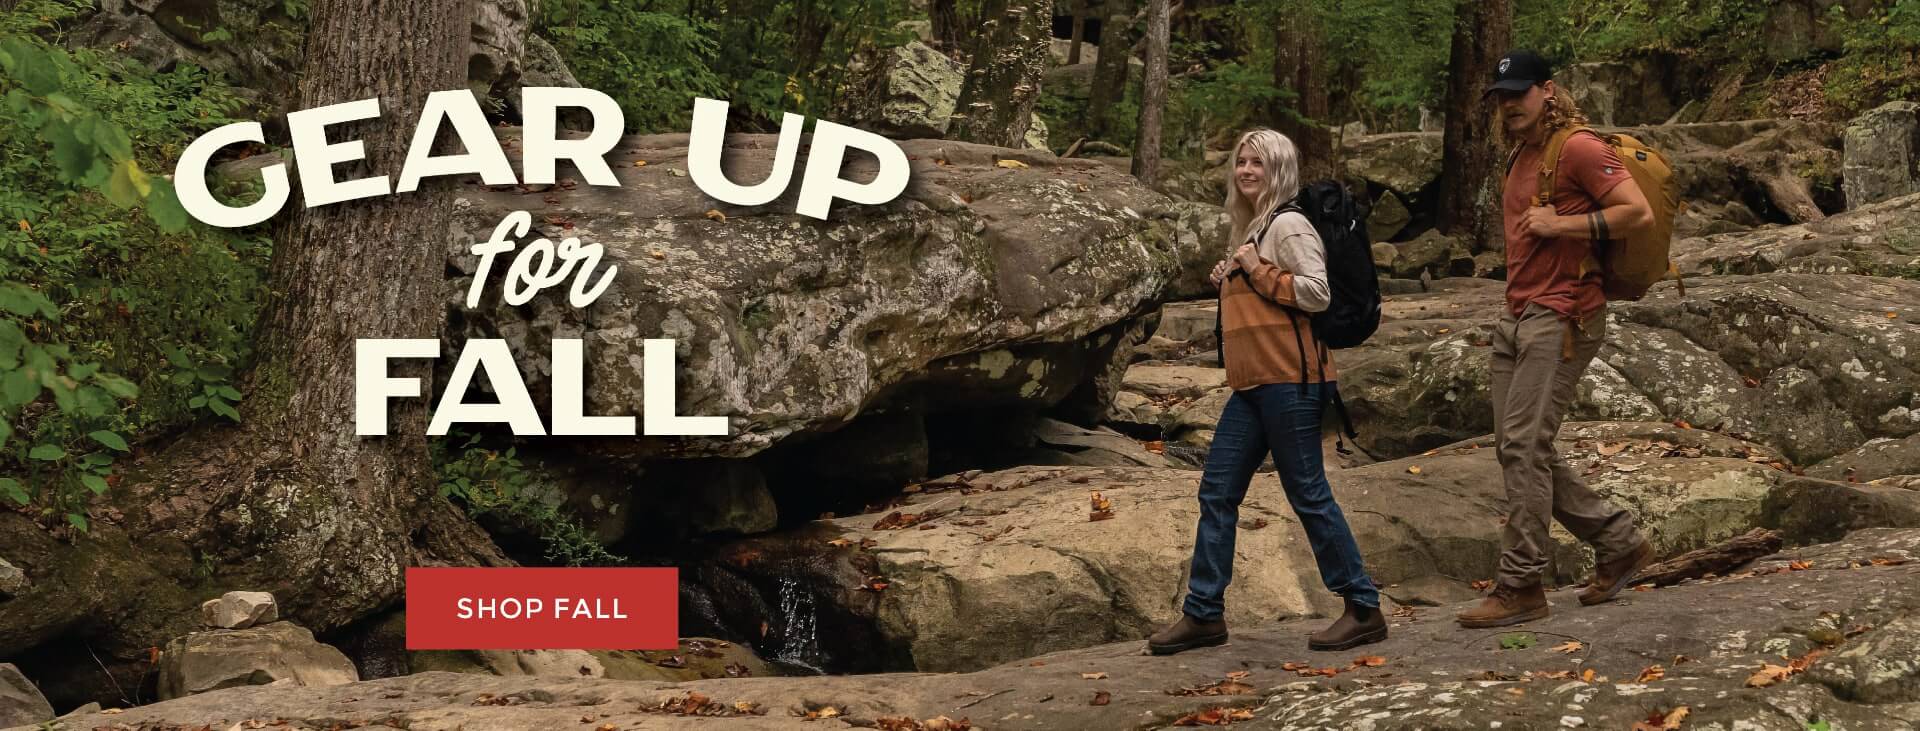 Gear up for Fall Promo Image of couple hiking on trail with hiking gear